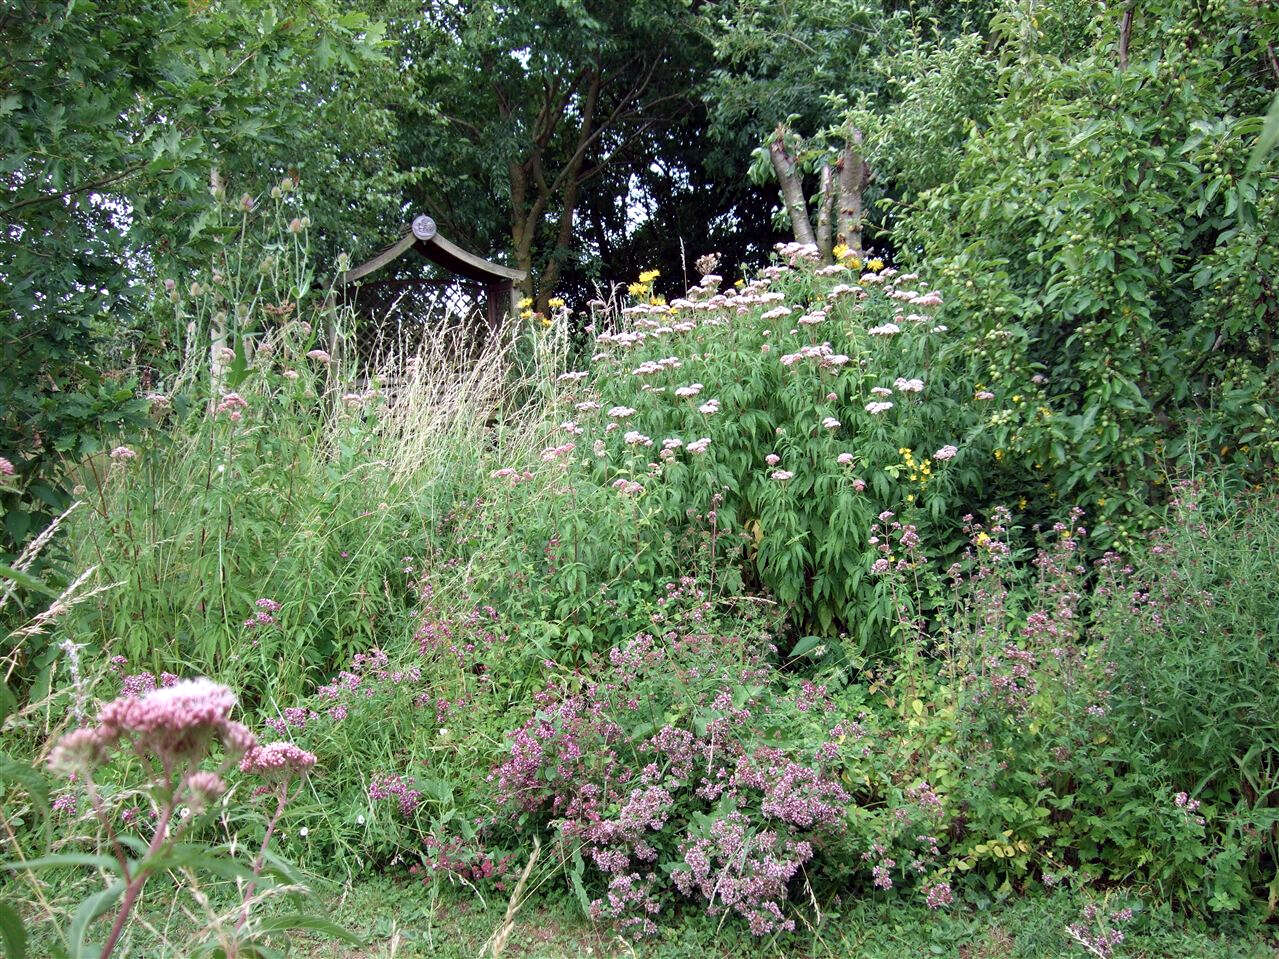 A predominantly elm-ash-oak backdrop to the main flowery glade of the woodland garden.